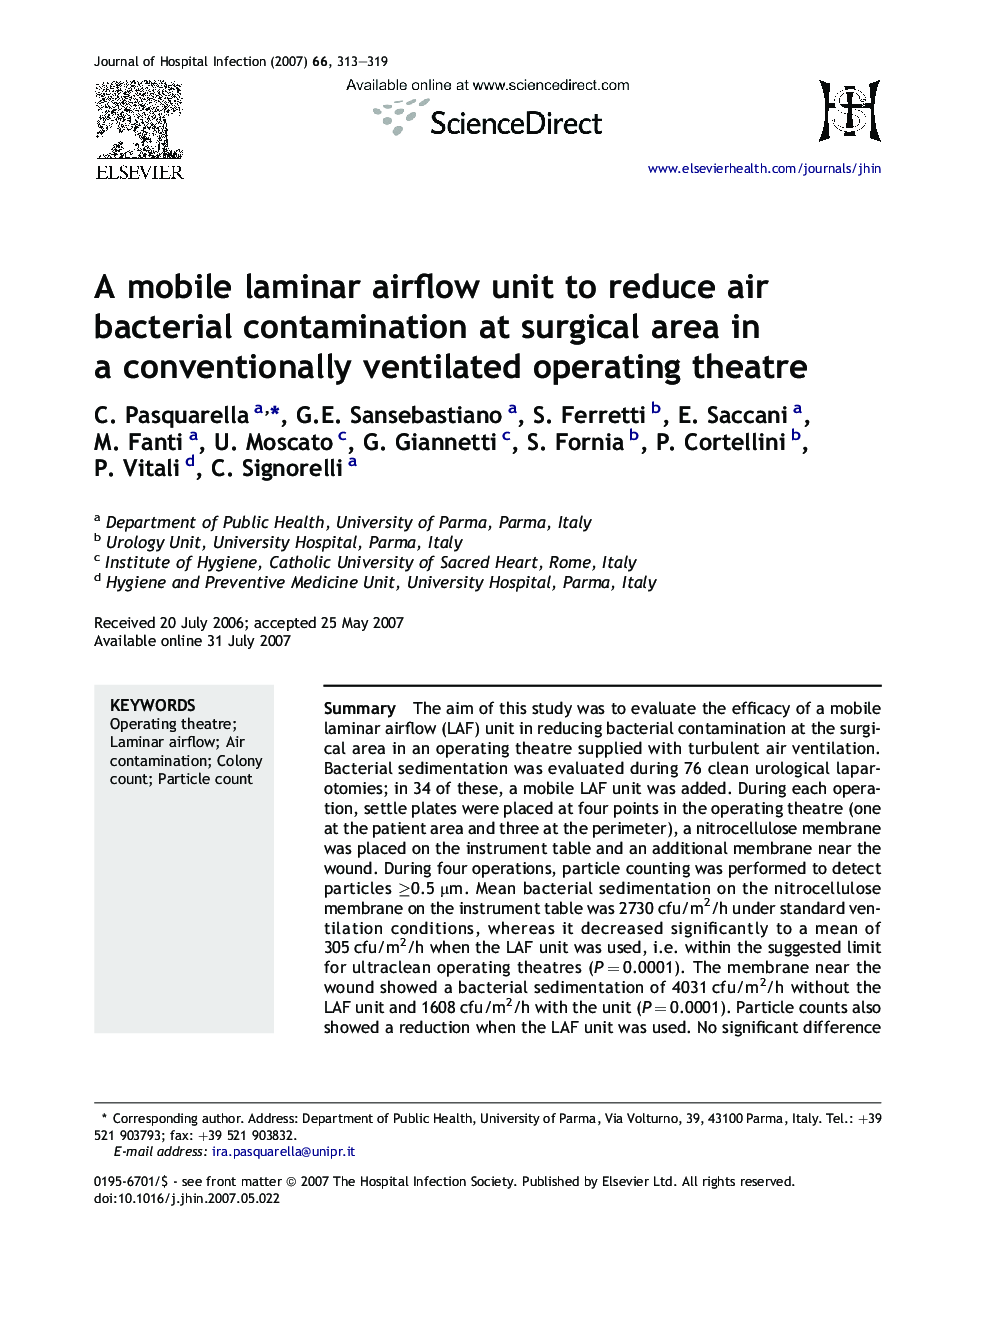 A mobile laminar airflow unit to reduce air bacterial contamination at surgical area in a conventionally ventilated operating theatre